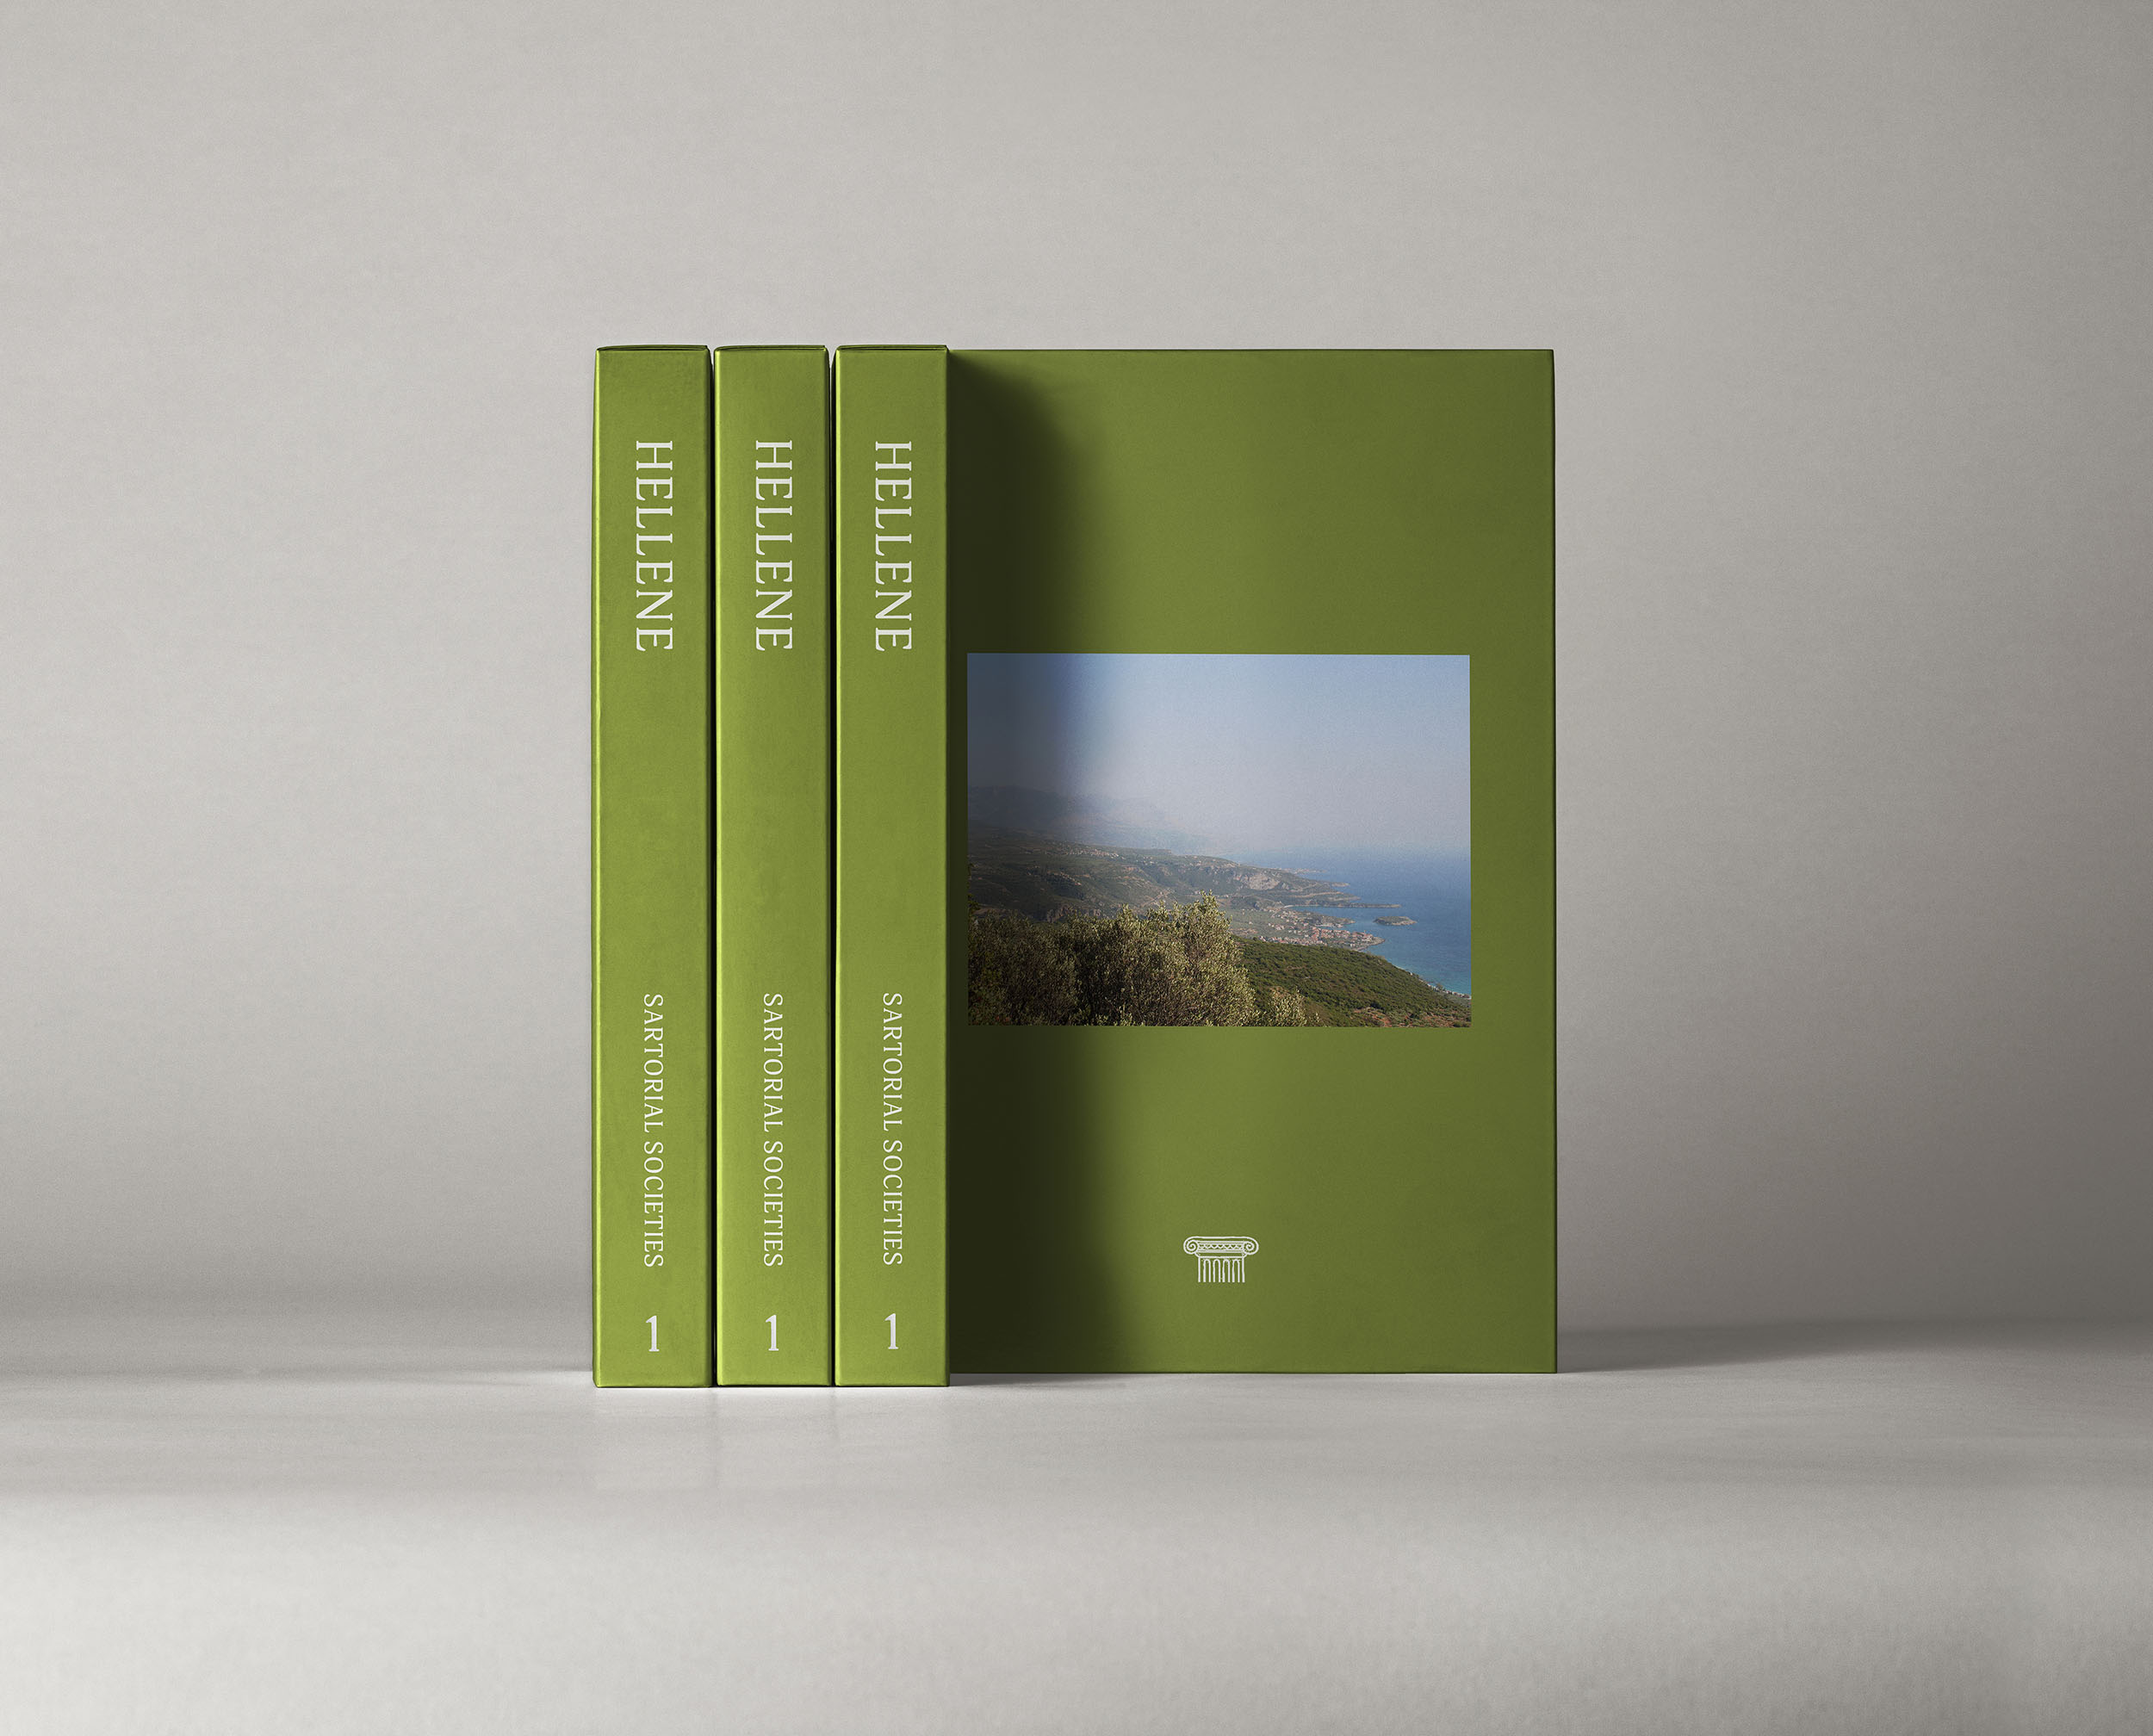 Slipcase mock-up by Katie Thompson showing an olive green design with travel image and spine text.